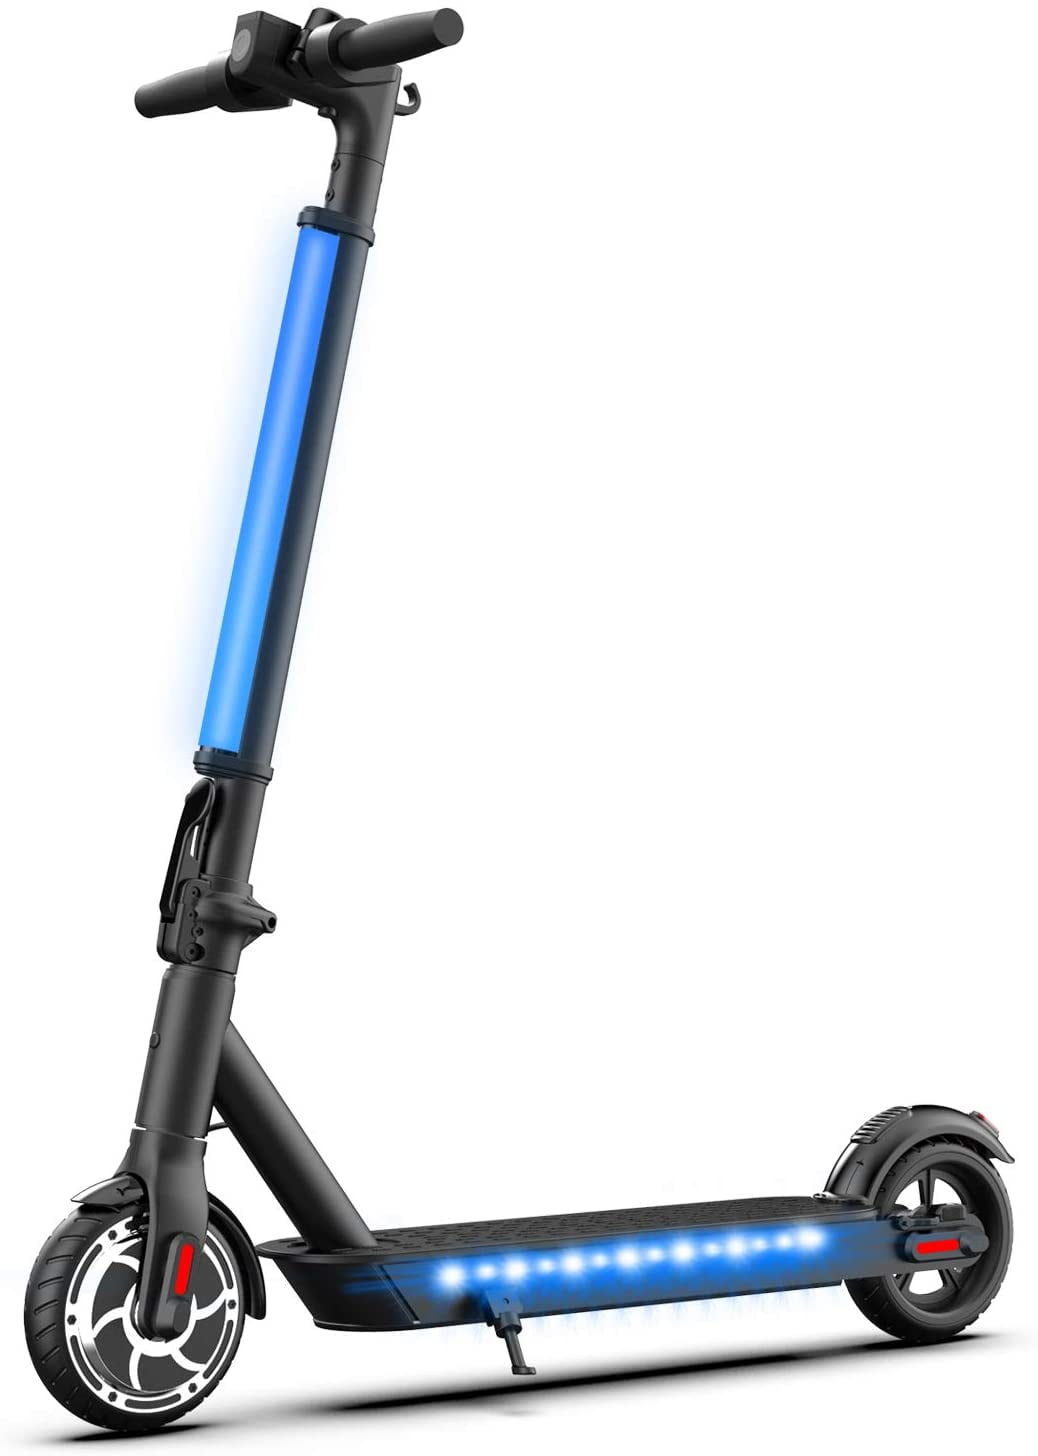 Hiboy S2 Lite Electric Scooter Portable Folding 6.5" Solid Tires Teens E-scooter 